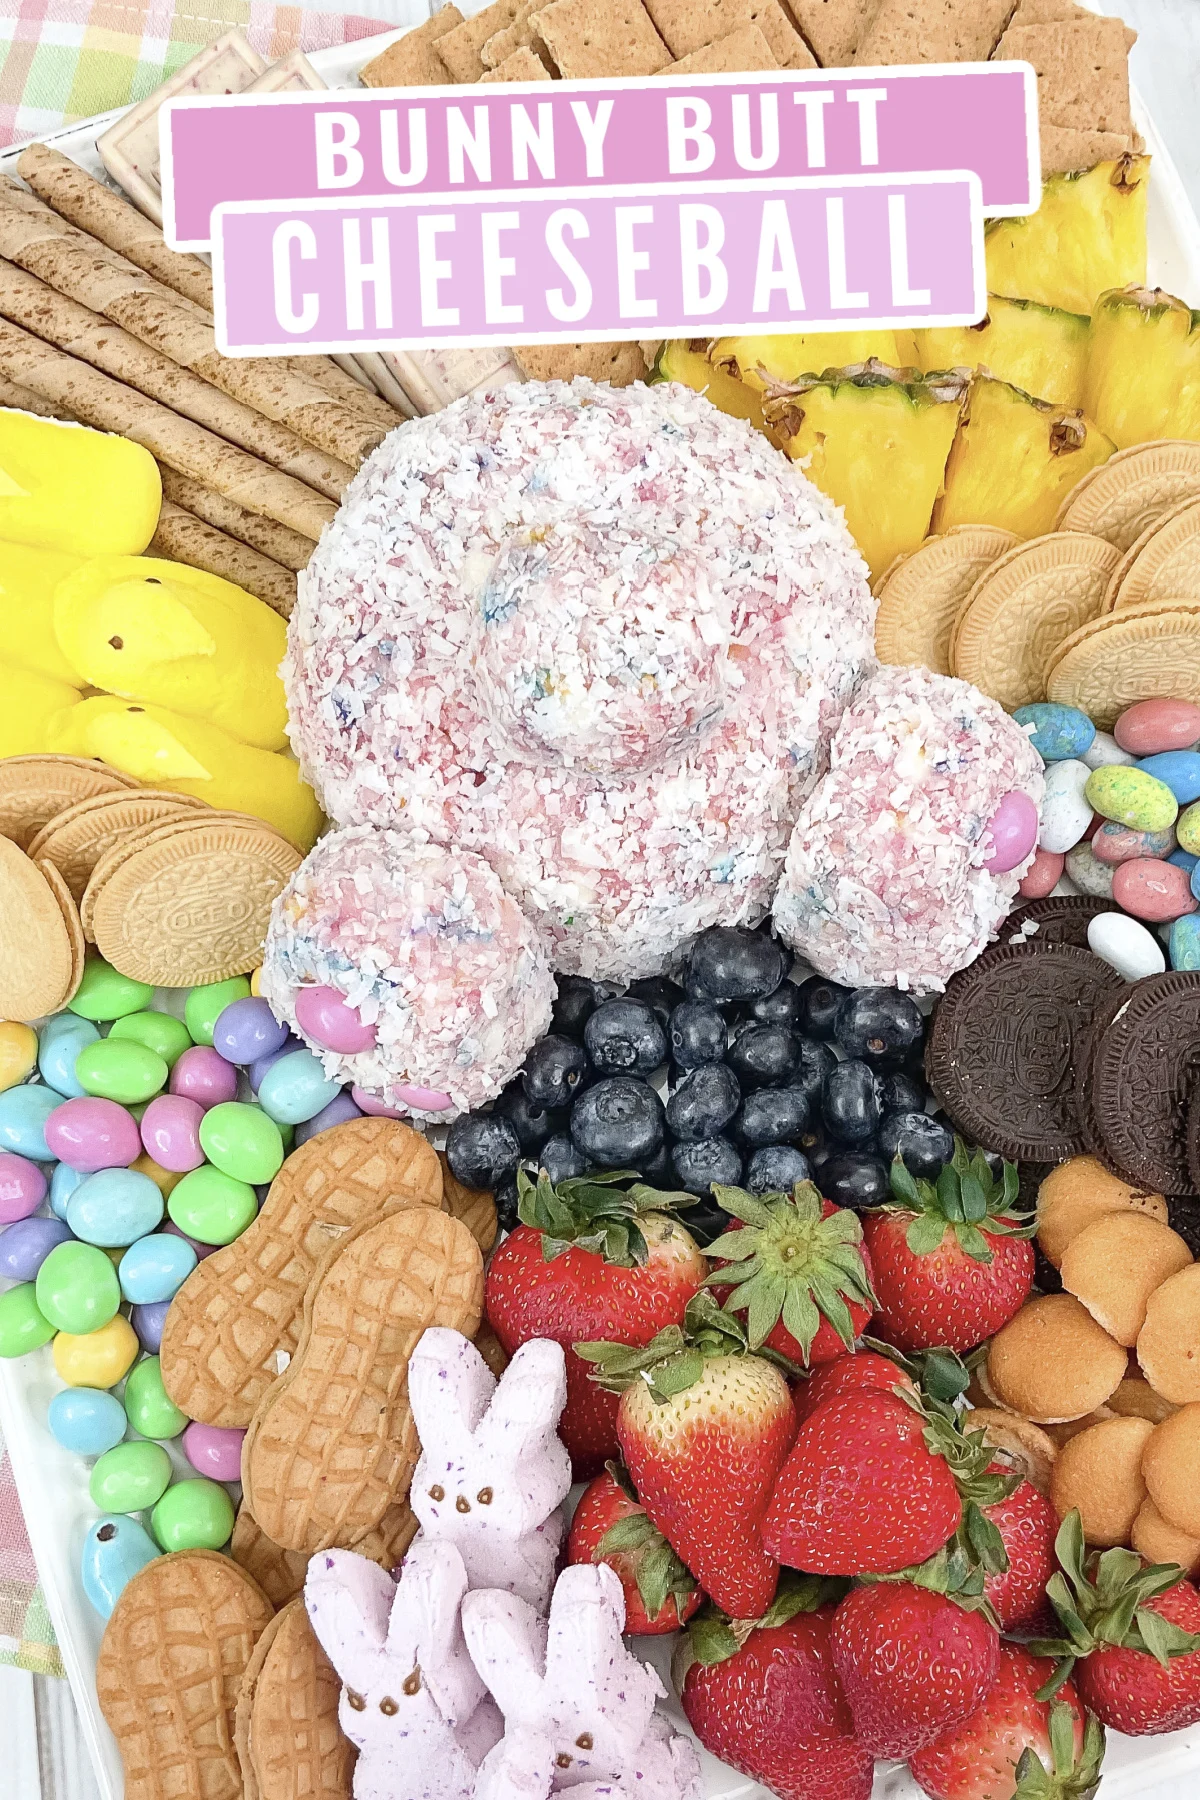 A delicious Bunny Butt Cheese Ball made with strawberry cake mix, cream cheese, sprinkles, and white chocolate – a hit at any Easter party!